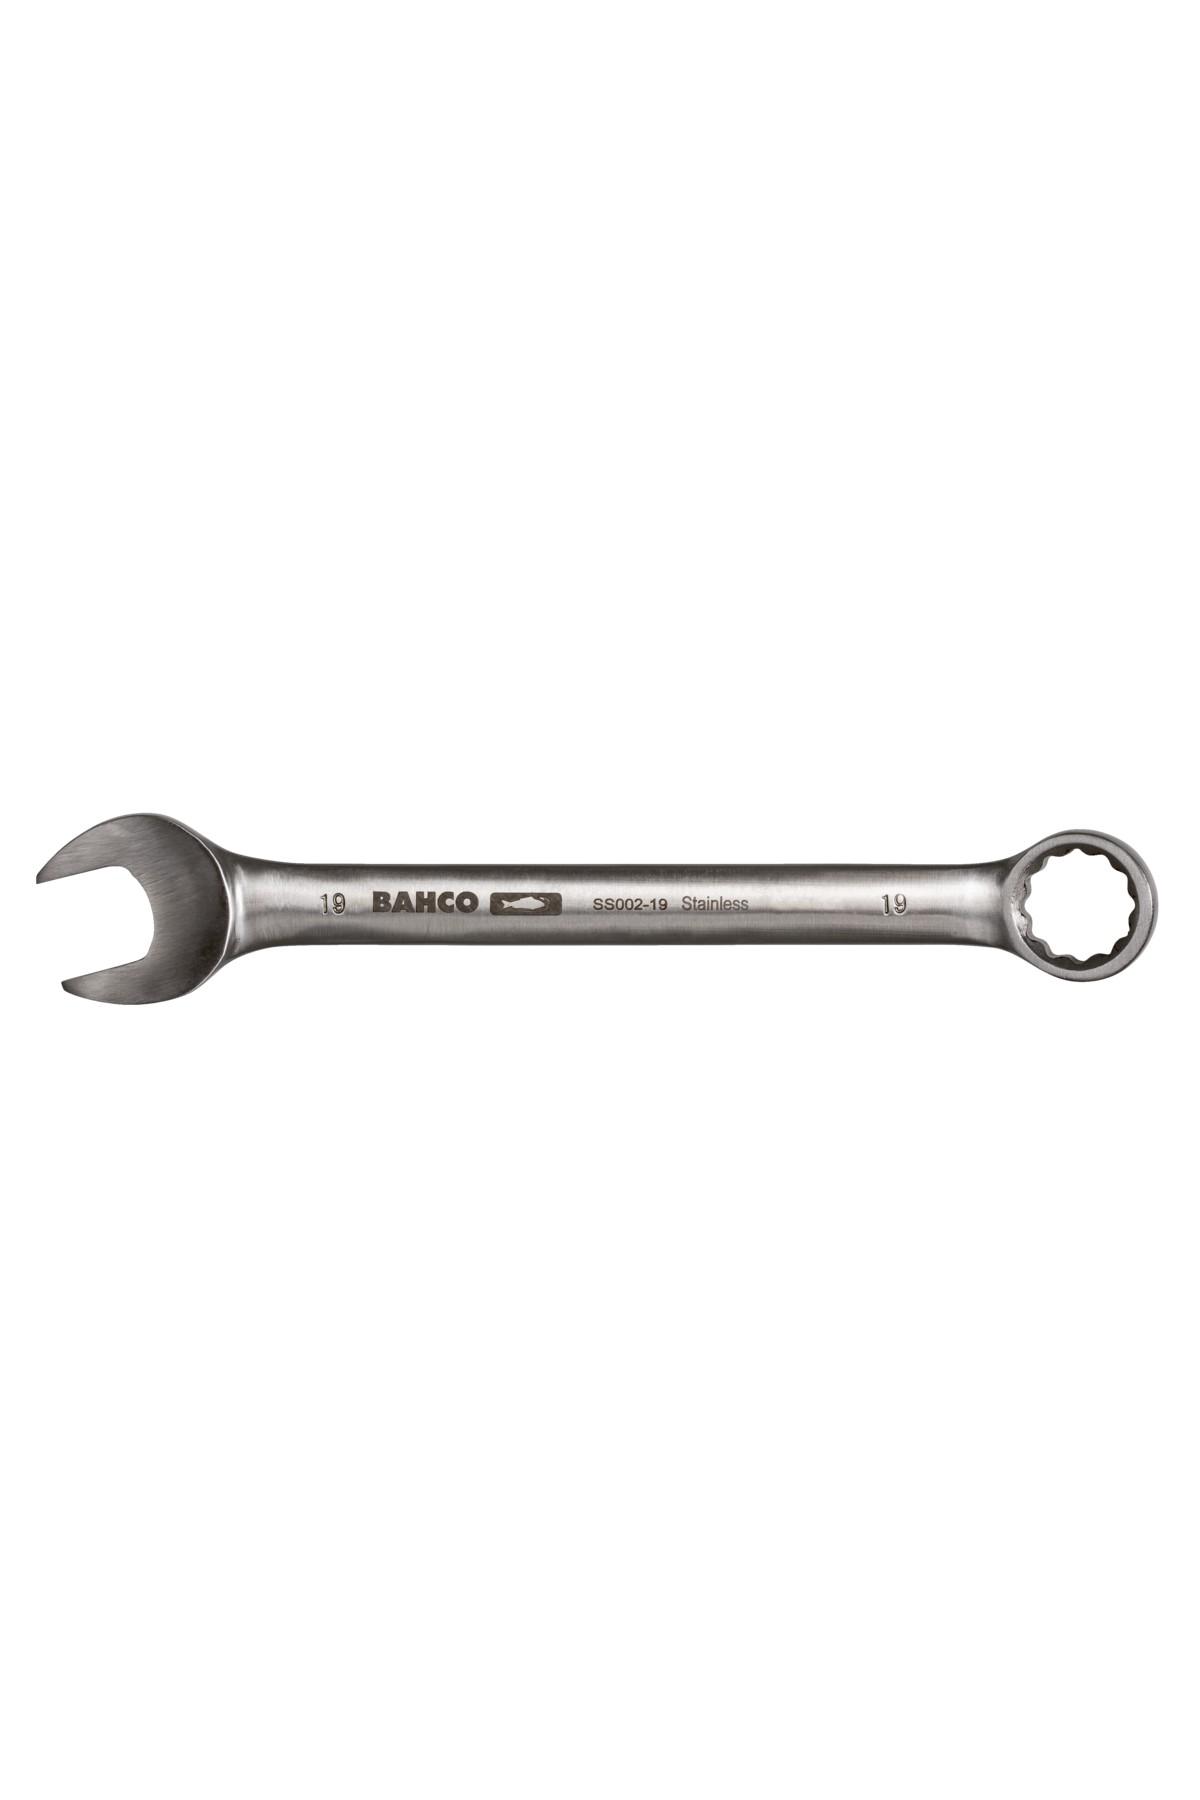 Ring spanner stainless 8mm